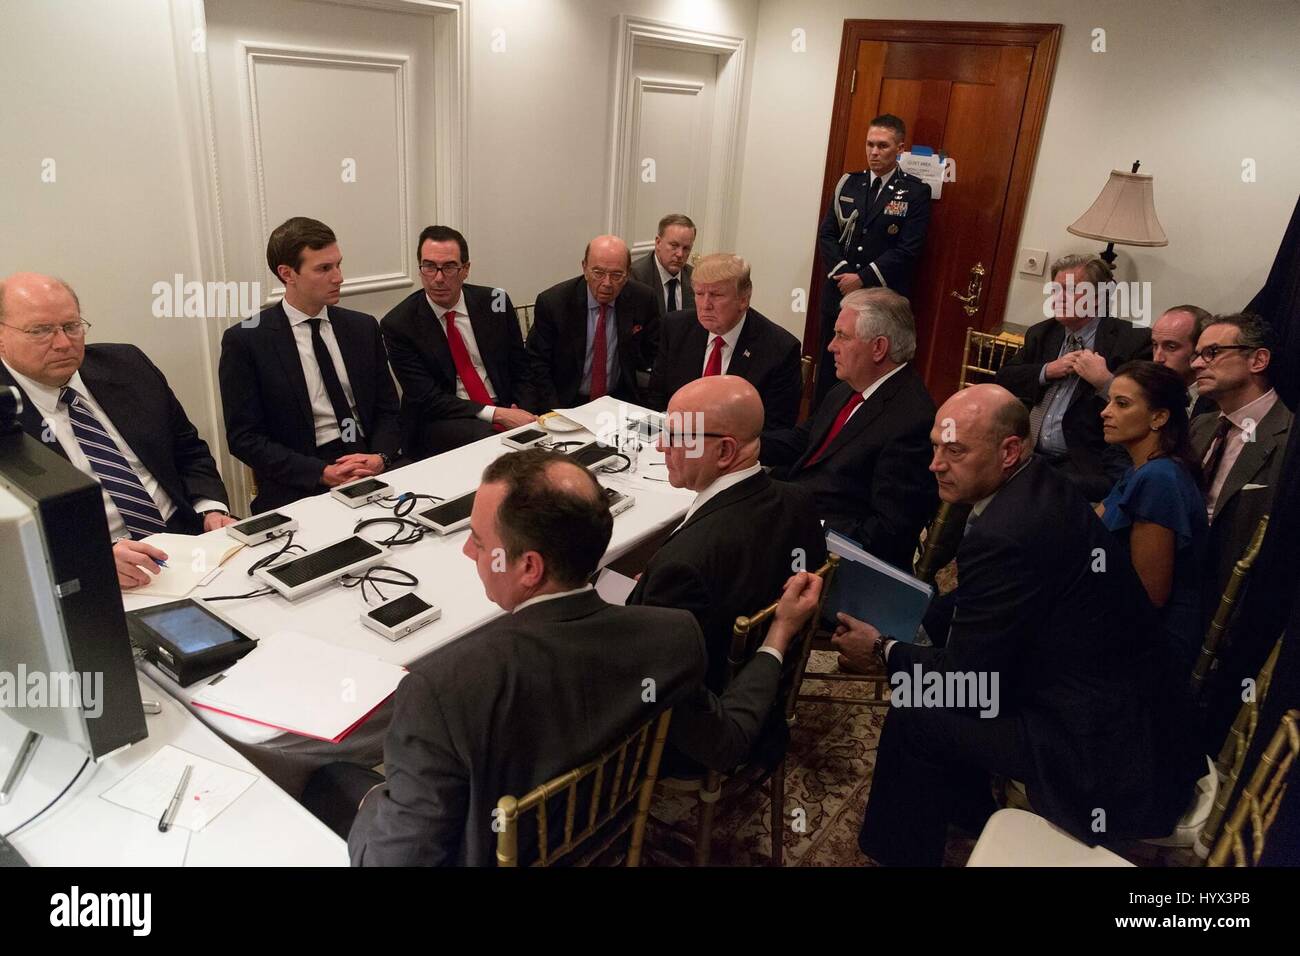 Palm Beach, United States Of America. 07th Apr, 2017. U.S President Donald Trump, center, is briefed by his National Security team as Navy launches 59 Tomahawk cruise missiles at Shayrat airbase in Syria in a secured location at Mar-a-Lago April 6, 2017 in Palm Beach, Florida. Sitting with the president L-R are deputy chief of staff for operations Joe Hagin, advisor Jared Kushner, Treasury Secretary Steve Mnuchin, Commerce Secretary Wilbur Ross, Secretary of State Rex Tillerson and national security adviser H.R. McMaster and chief of staff Reince Priebus. Credit: Planetpix/Alamy Live News Stock Photo